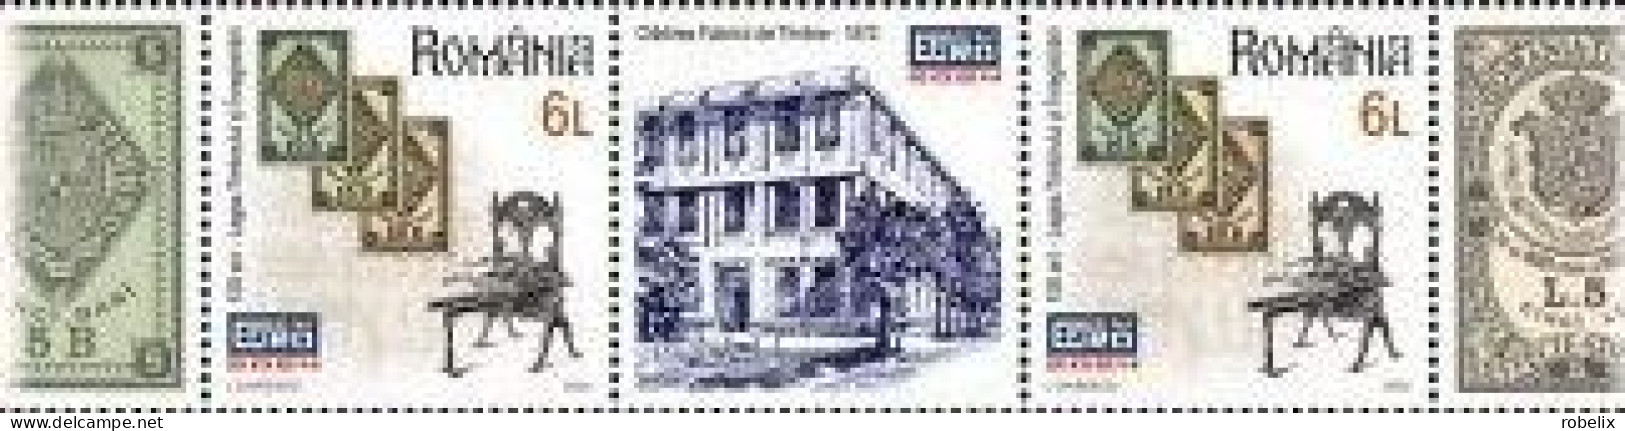 ROMANIA 2024 EFIRO - WORLD STAMP EXHIBITION IN BUCHAREST Strip Of 2 Stamps + 1 Label  MNH** - Expositions Philatéliques